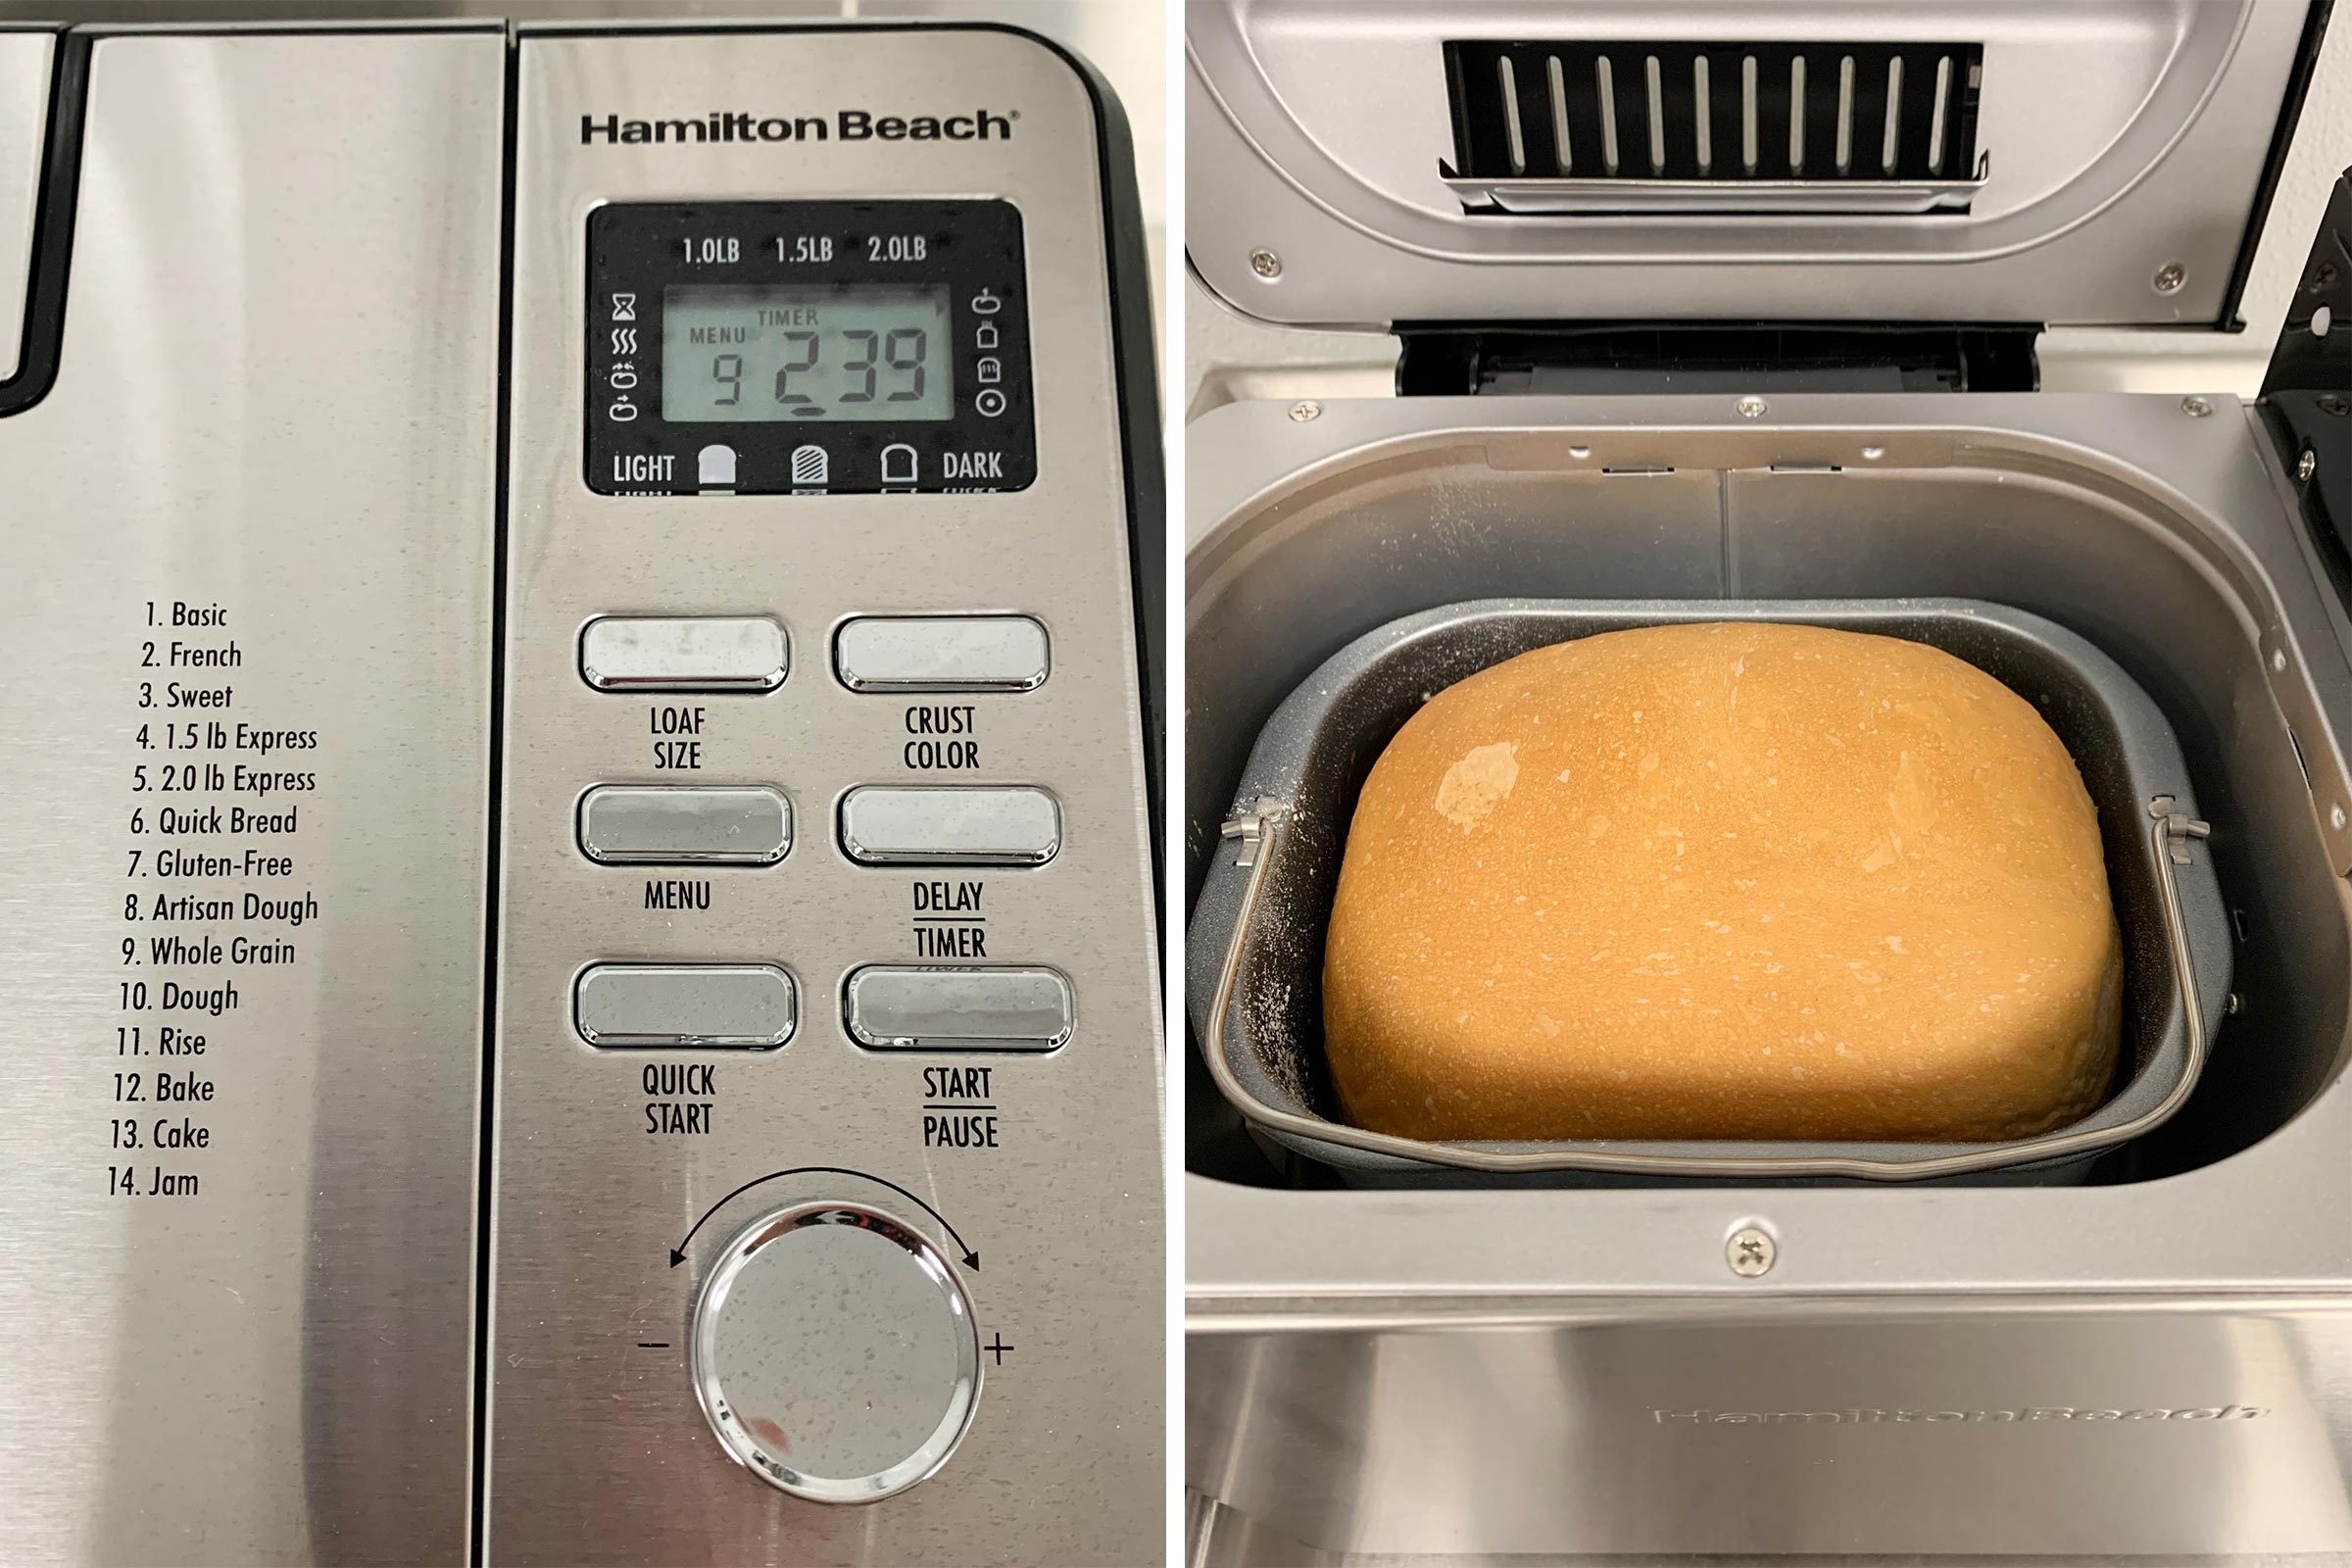 Hamilton Beach 1.5 Lbs. Artisan Dough and Bread Maker in White and  Stainless Steel